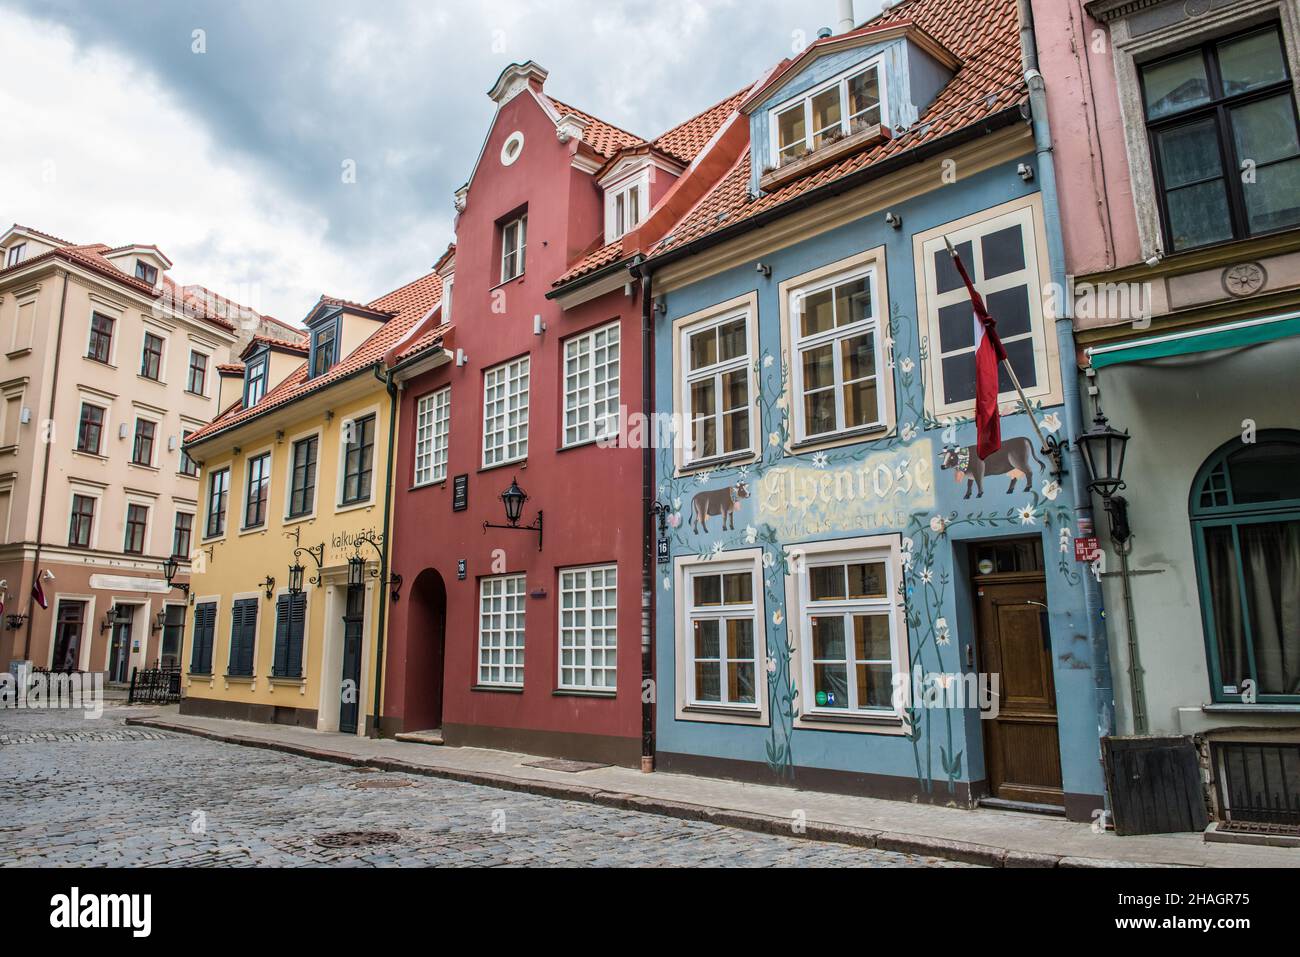 Riga, Latvia - May 21, 2021: Jauniela street in Riga with building of restaurant 1221 in the historic house of Old Town Stock Photo